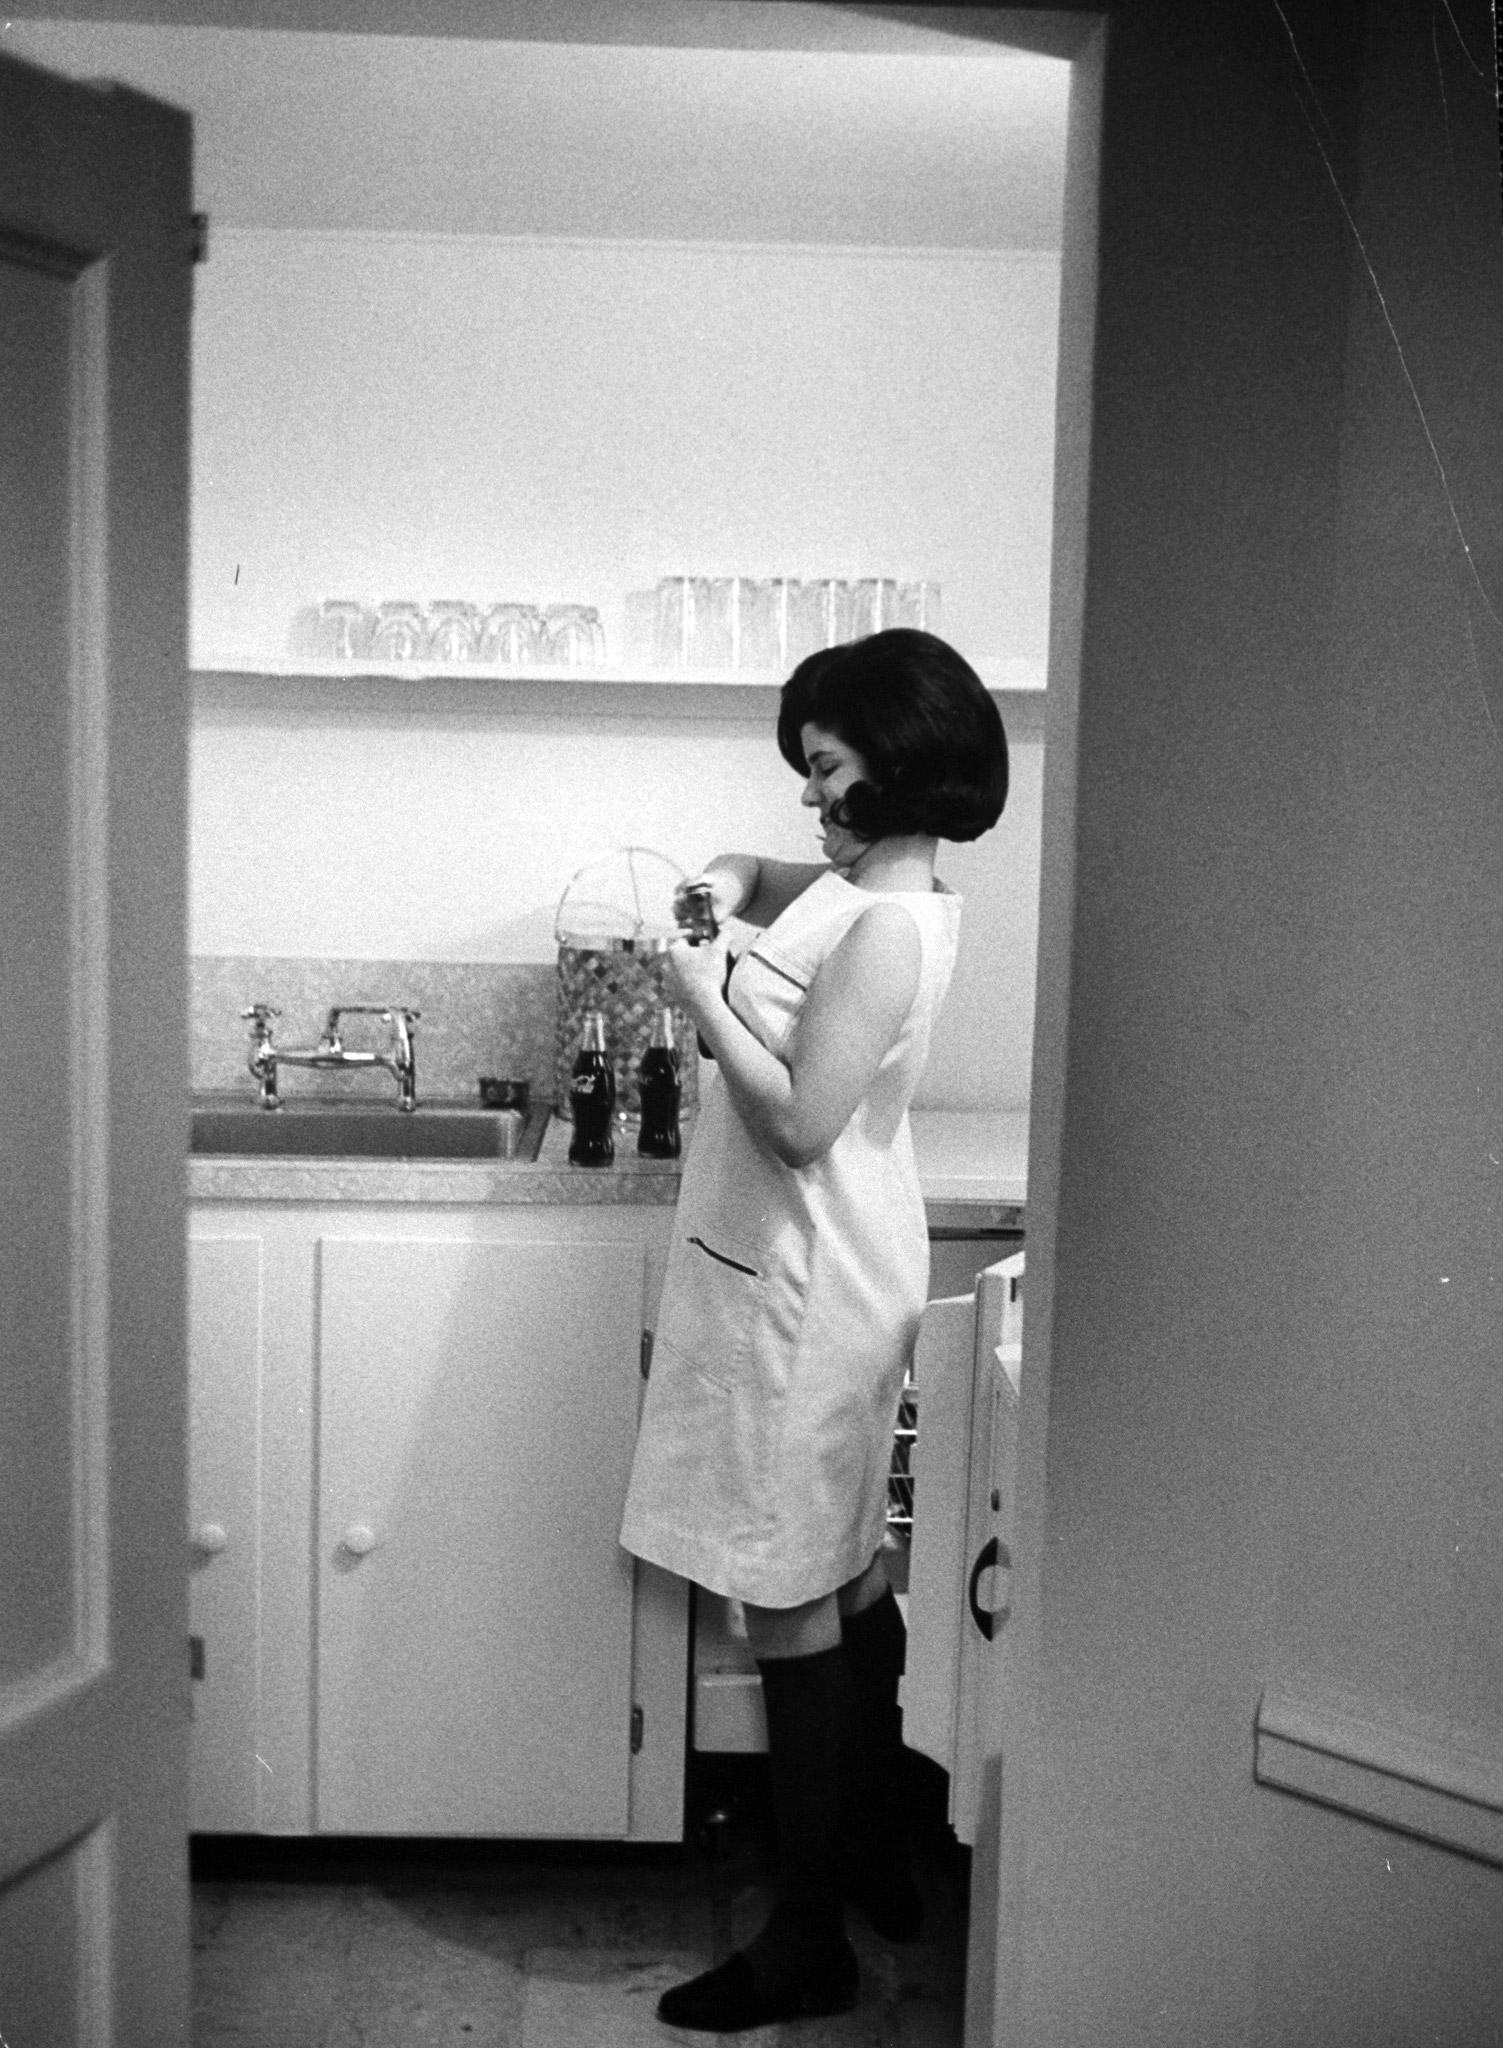 In special kitchenette off the solarium Luci opens drinks for friends. Her allowance of $5 a week covers long-distance calls, Saturday lunches with friends, incidental school supplies.